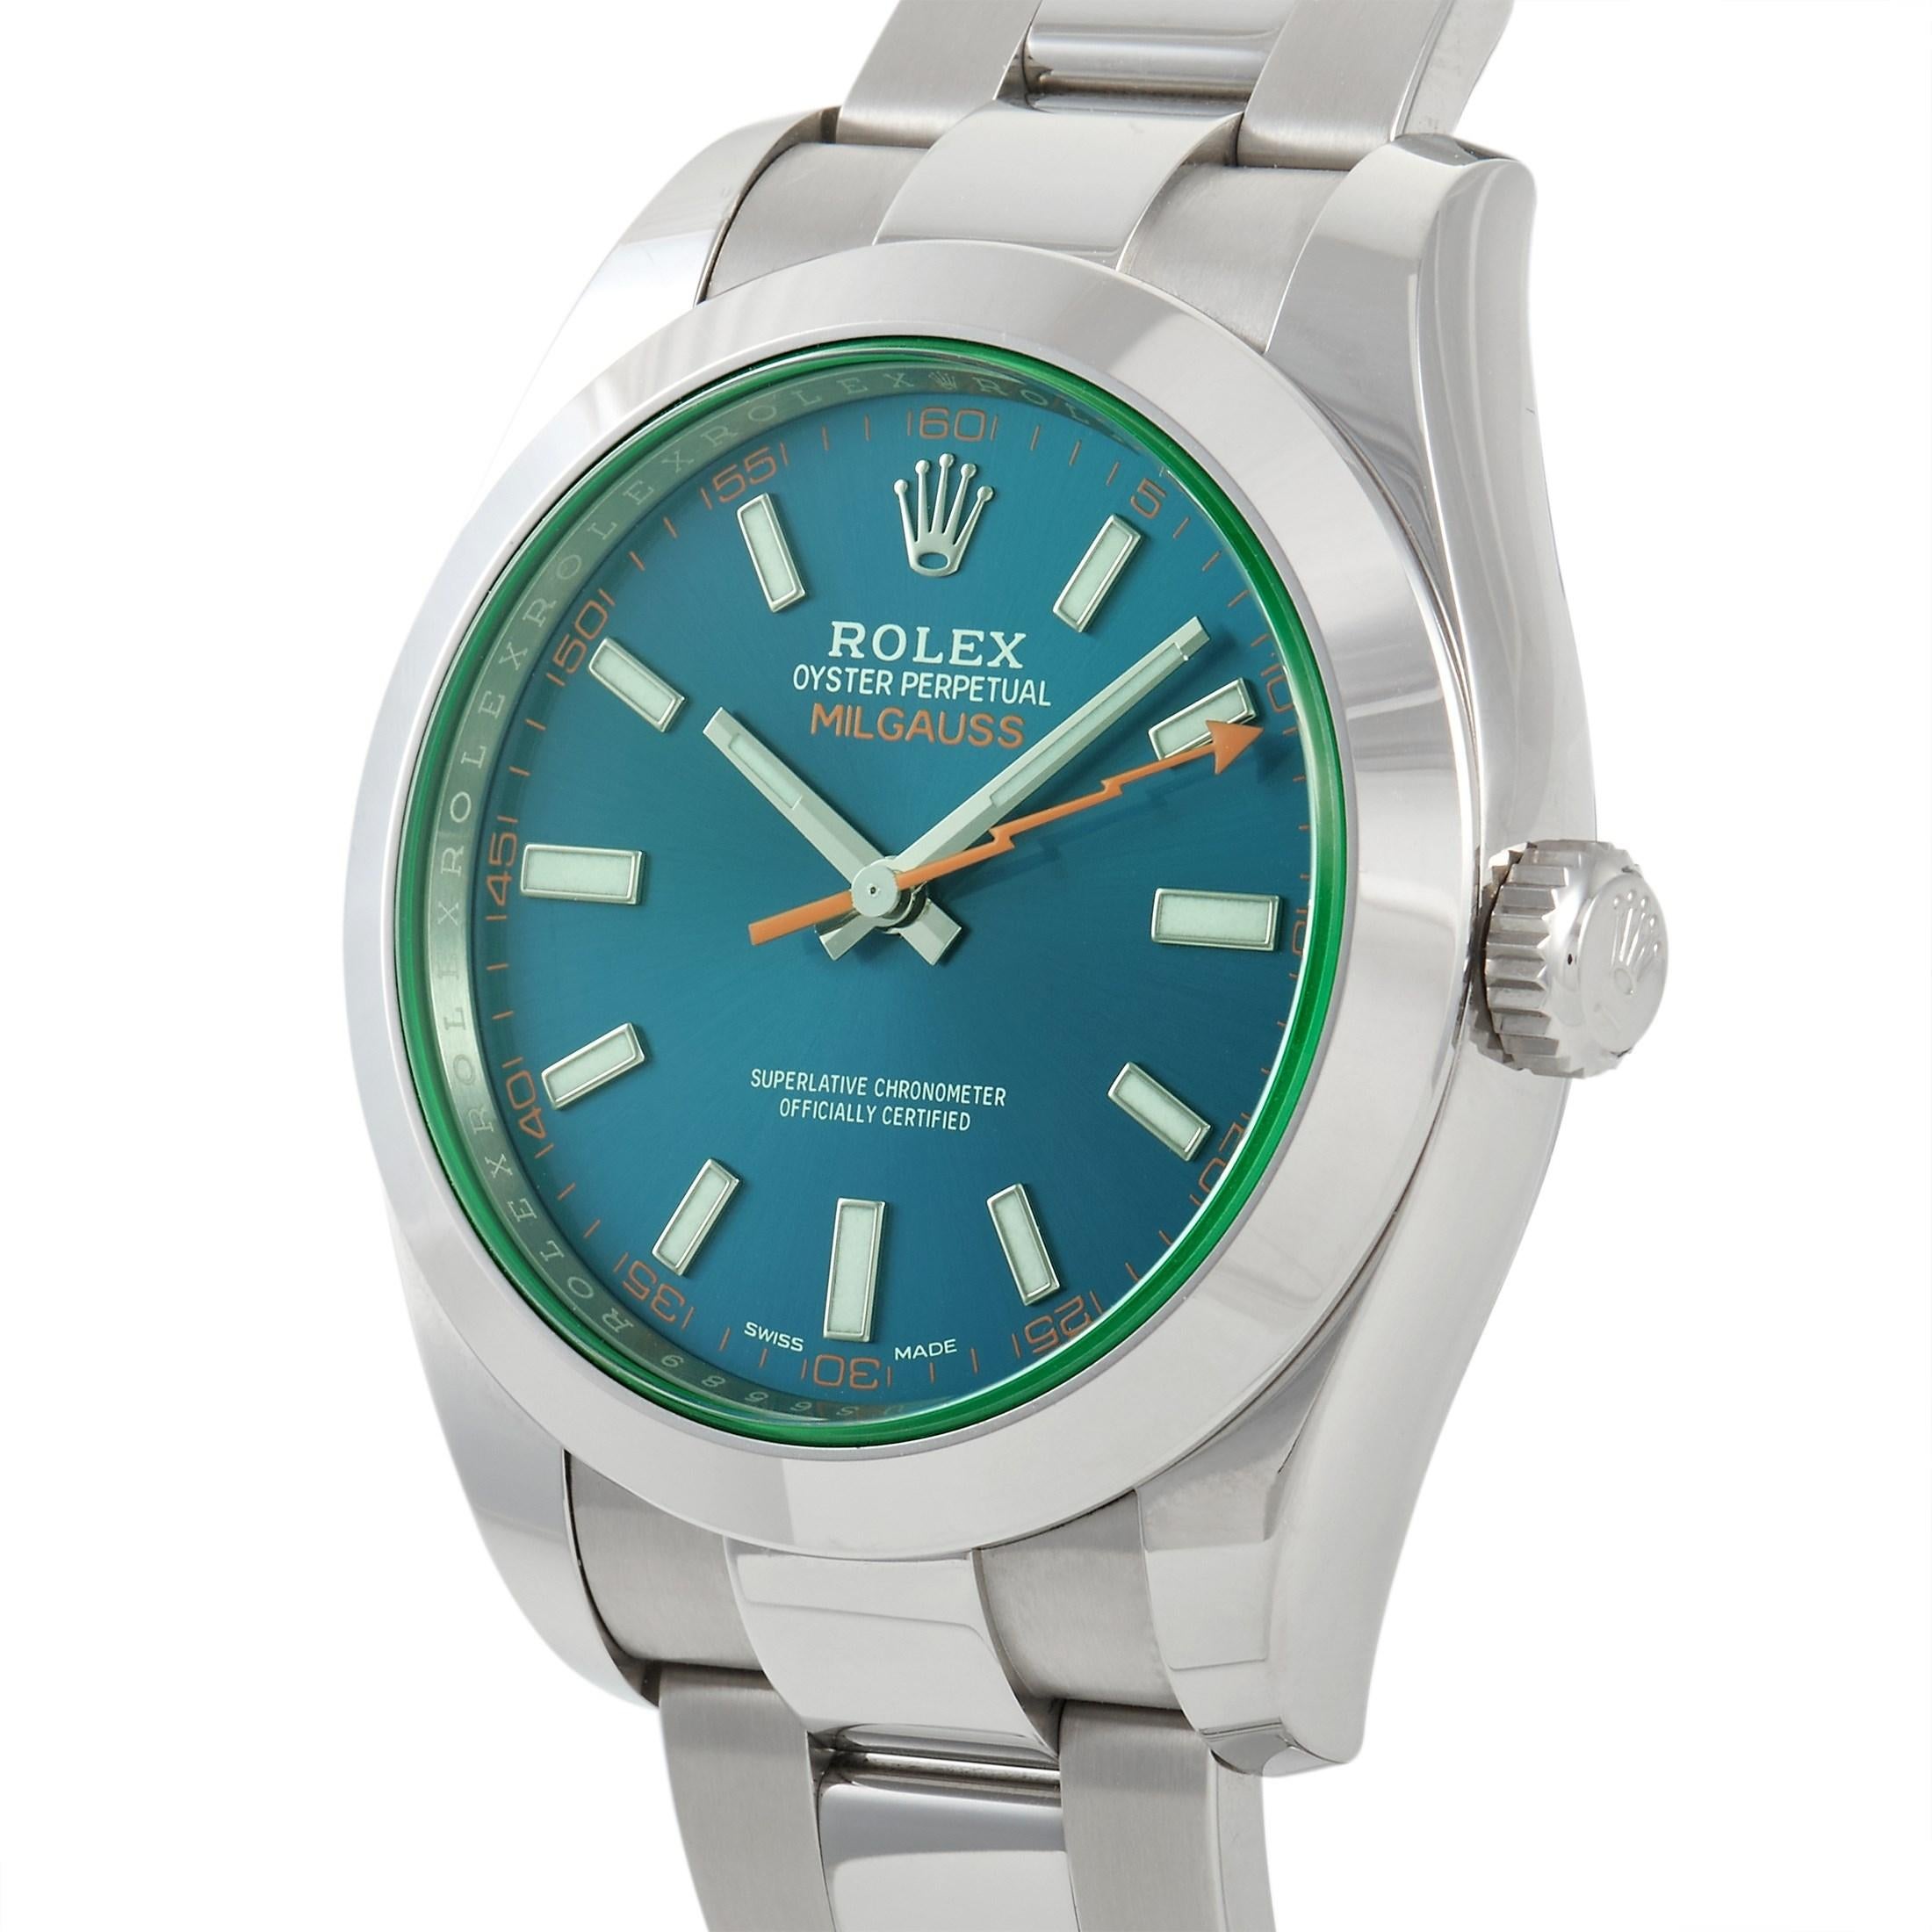 The Rolex oyster perpetual Milgauss watch features a 40mm oystersteel case that features a screw-down twin lock double water proofness crown that is waterproof up to a depth of 100 meters. The striking z-blue dial stands apart with an orange